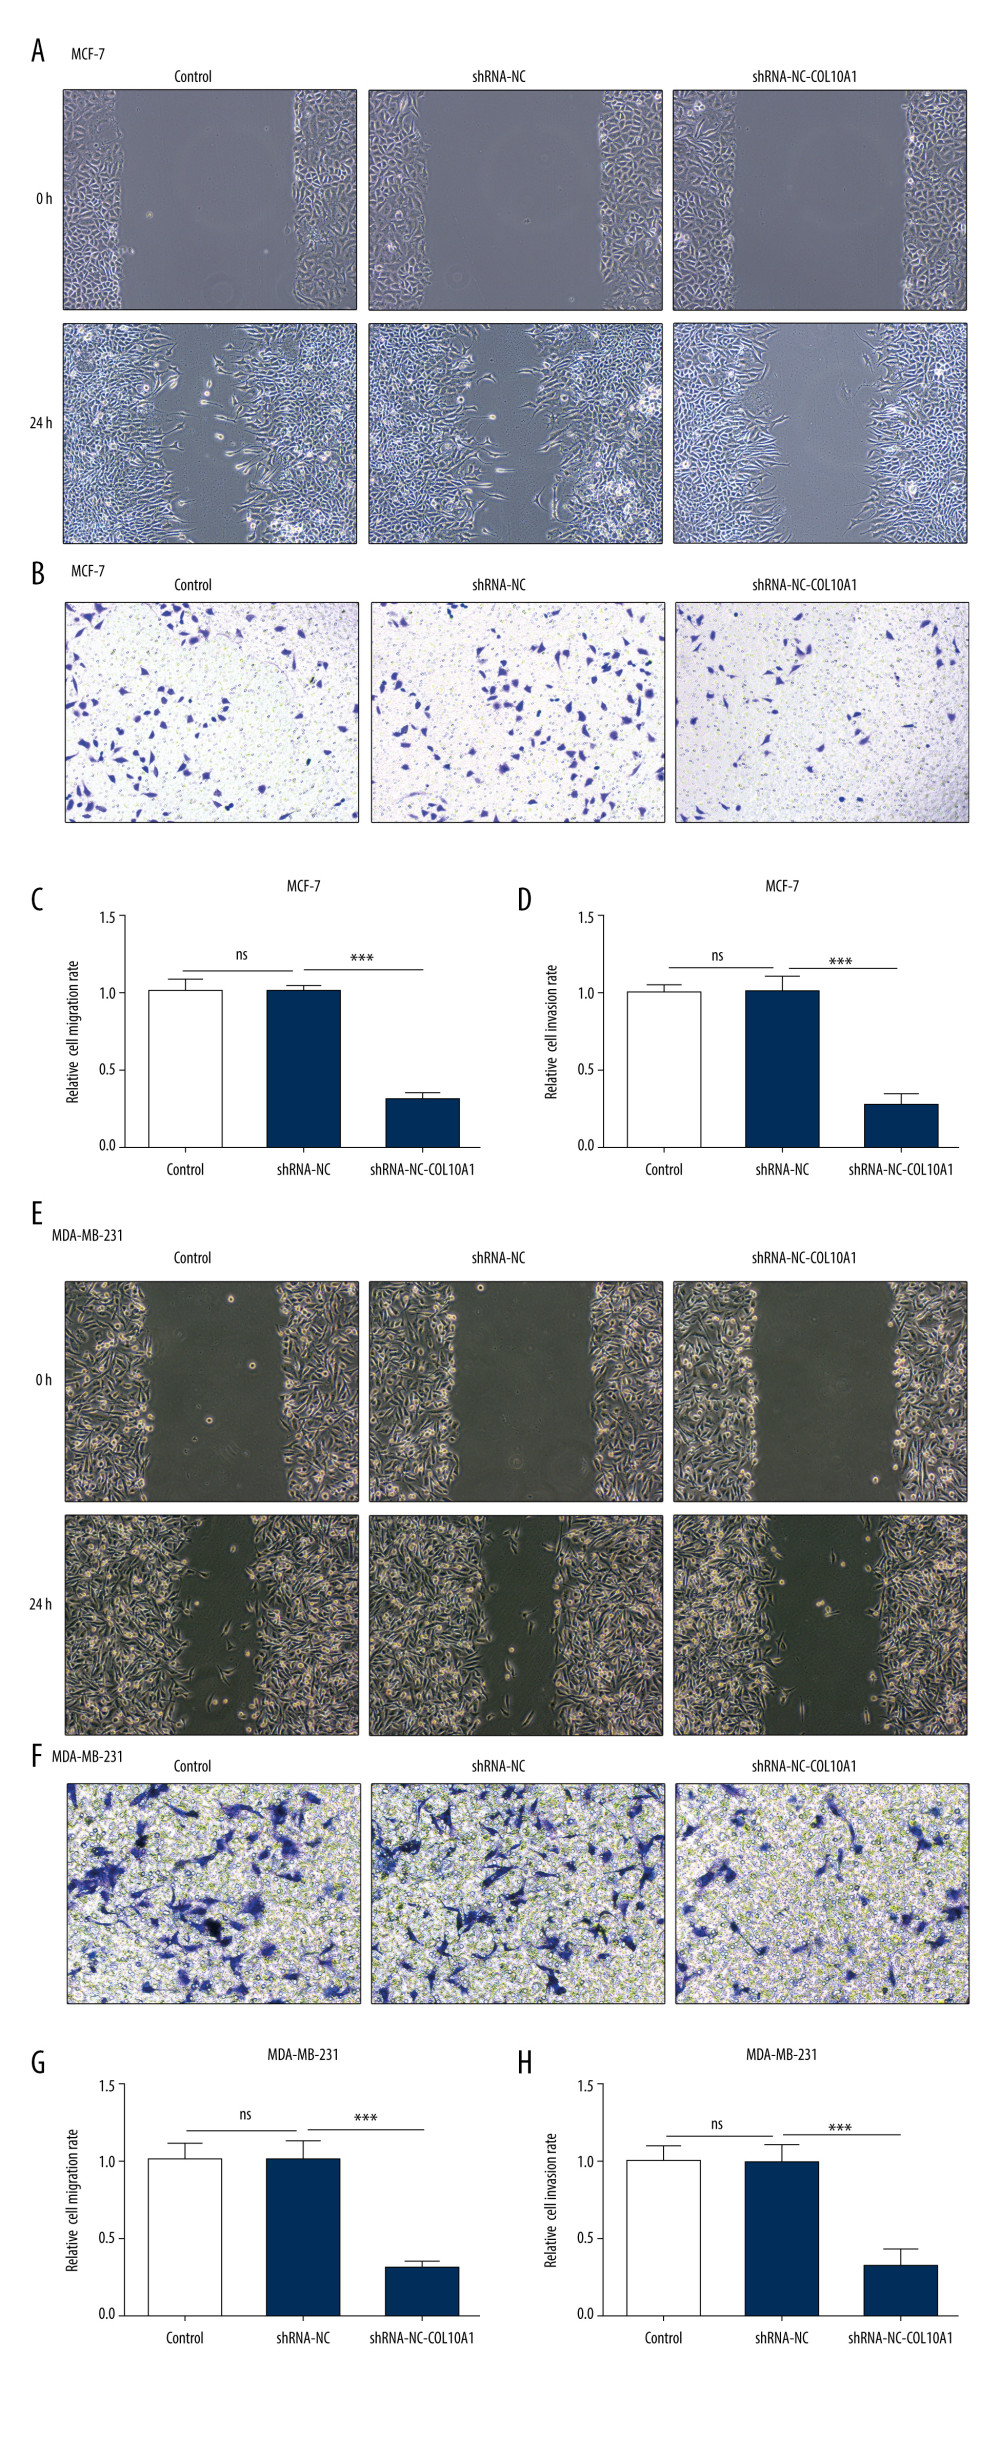 Downregulation of COL10A1 restrained the migration and invasion of breast cancer cells. (A, C) Wound healing assay was used to examine the effect of silenced COL10A1 on MCF-7 cell migration (100×). (B, D) Transwell assay was used to examine the effect of silenced COL10A1 on MCF-7 cell invasion (100×). (E, G) Wound healing assay was used to examine the effect of silenced COL10A1 on MDA-MB-231 cell migration (100×). (F, H) Transwell assay was used to examine the effect of silenced COL10A1 on MDA-MB-231 cell invasion (100×). *** p<0.001.